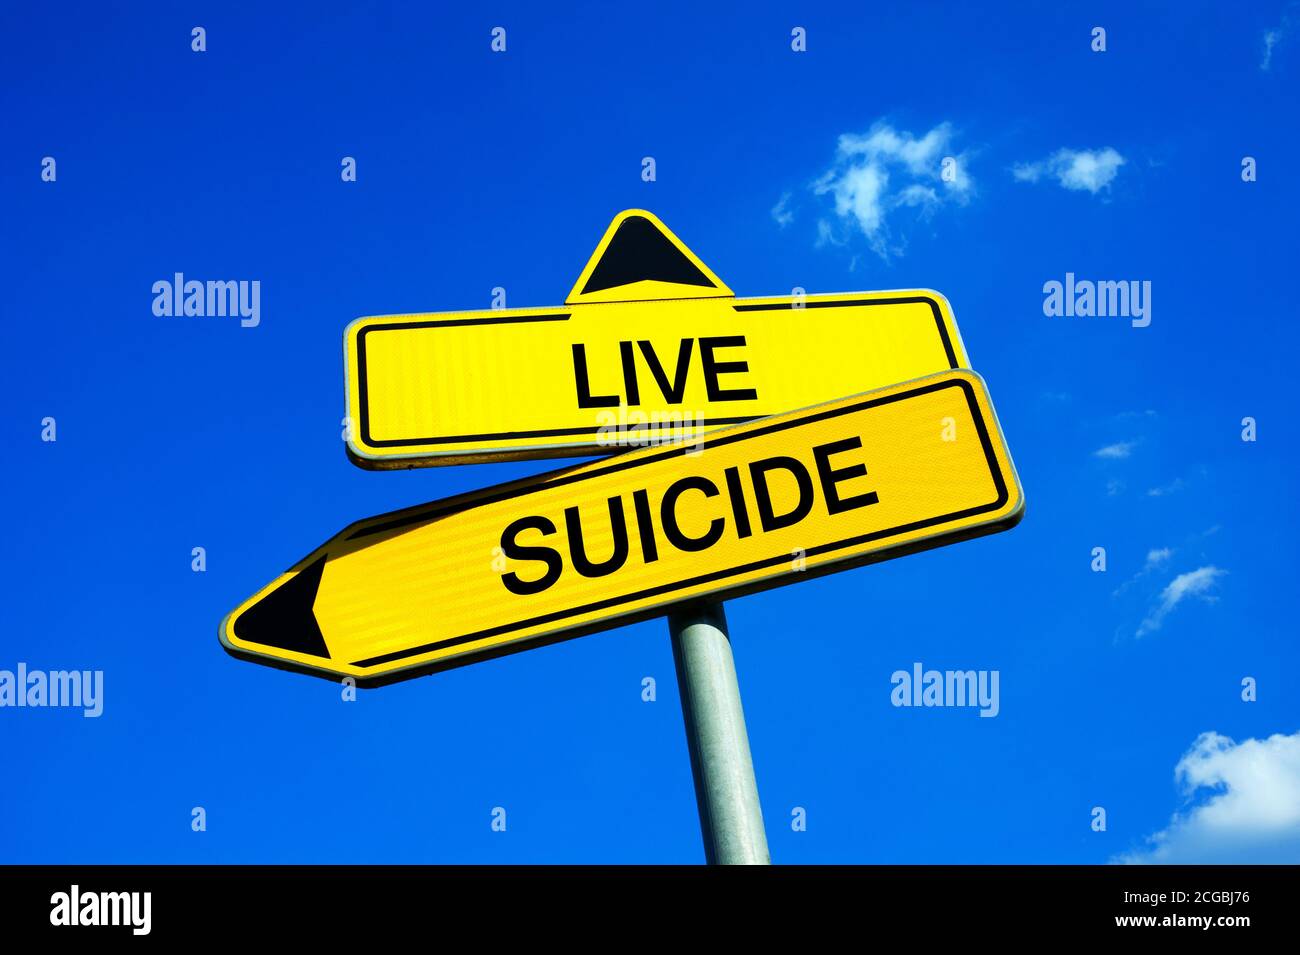 Live or Suicide - Traffic sign with two options - appeal to overcome problems, crisis, hopelessness and depression. Overcoming negativity with positiv Stock Photo